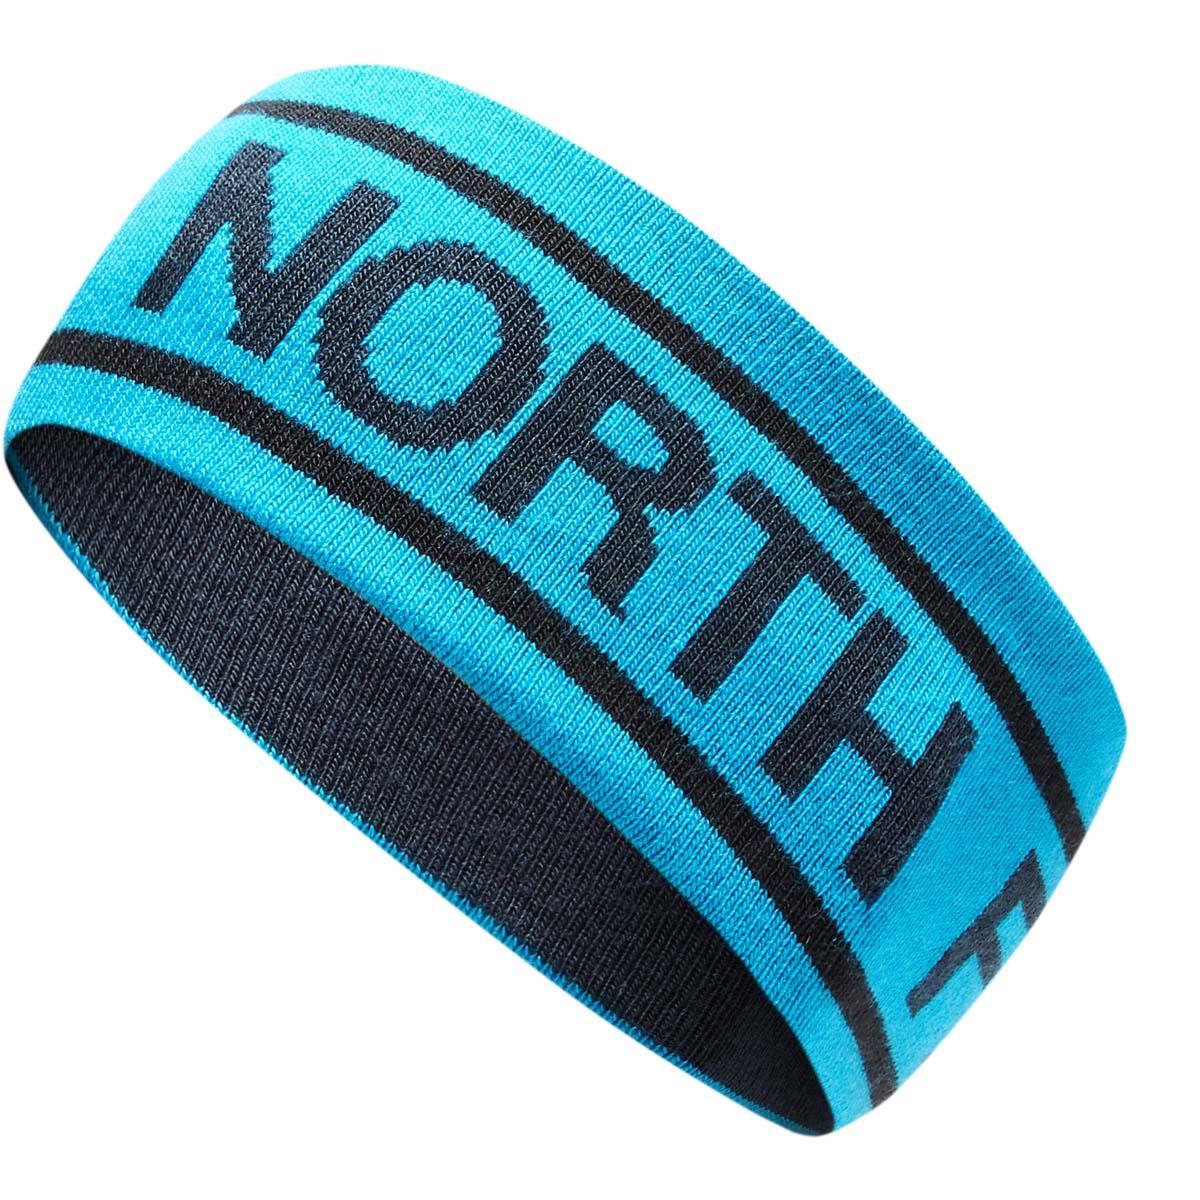 the north face chizzler headband